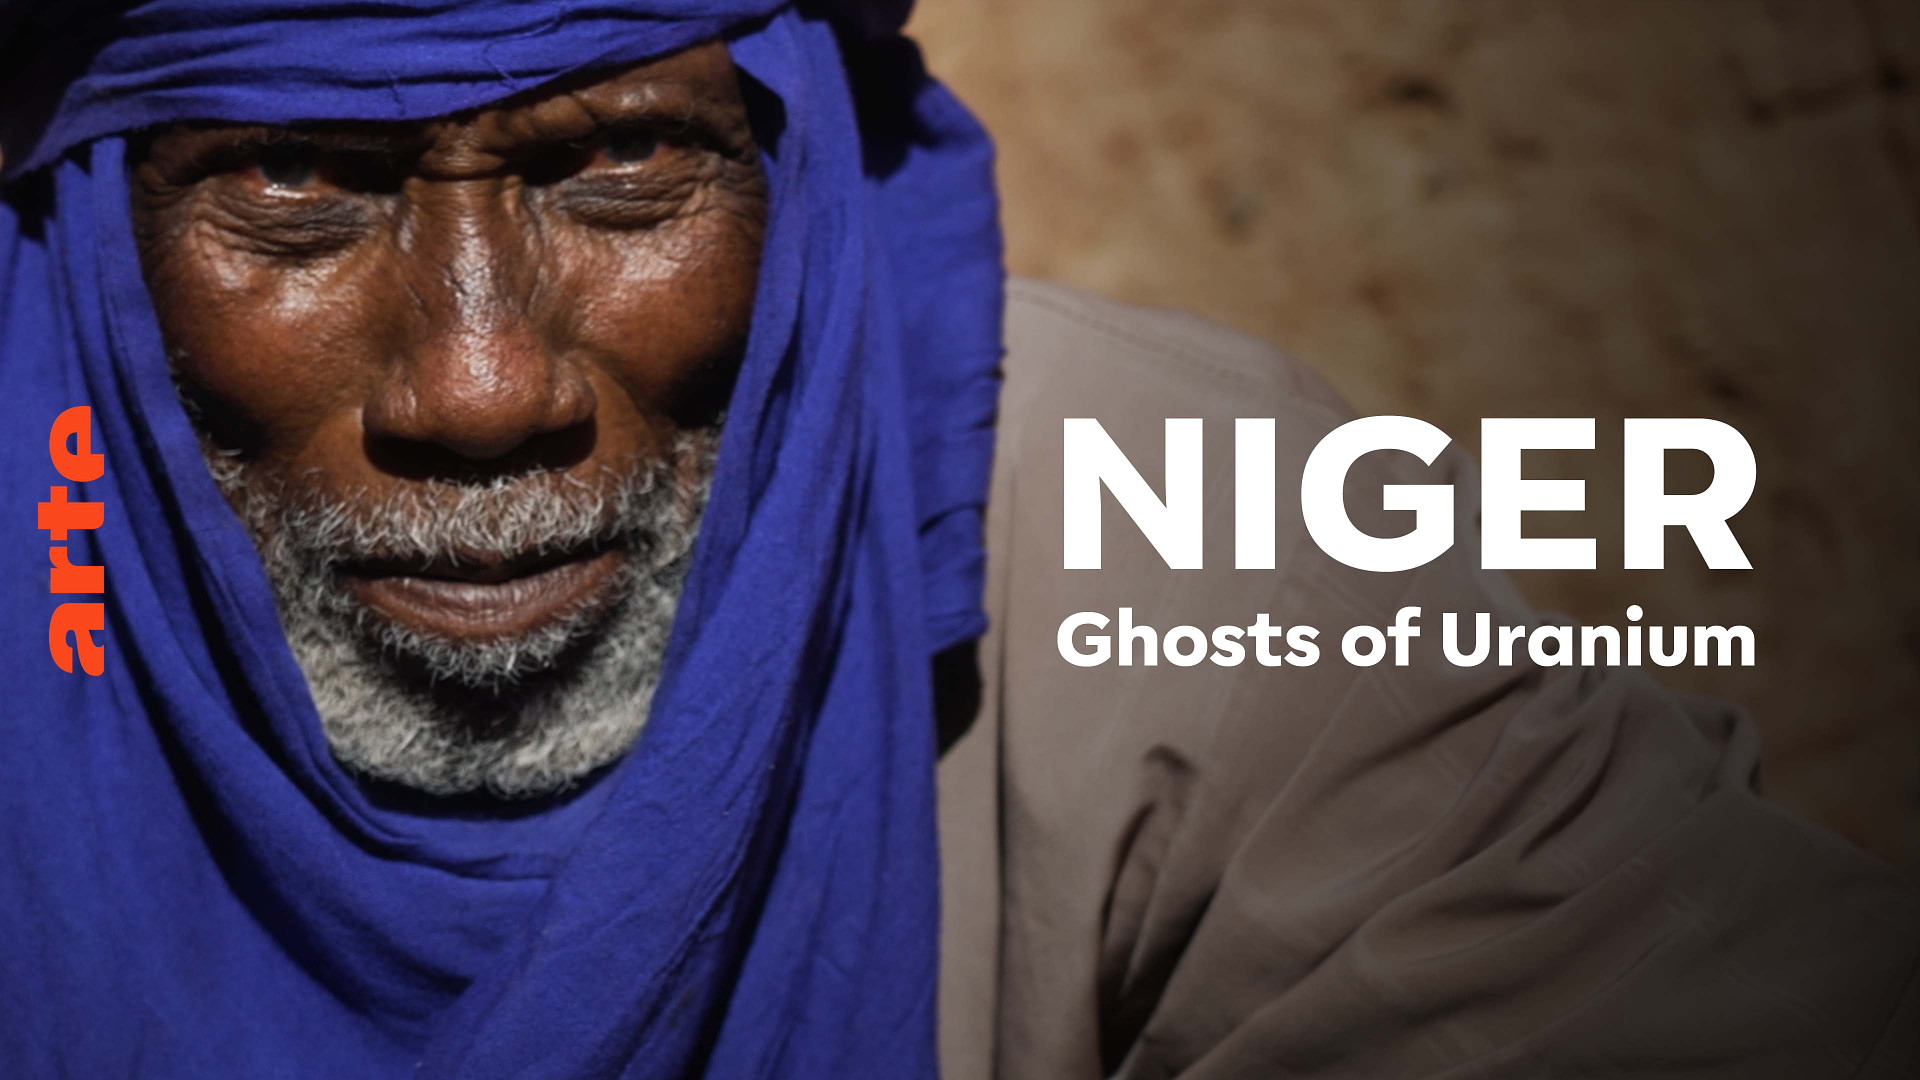 ARTE Reportage - Niger: Ghosts of Uranium - Watch the full documentary |  ARTE in English